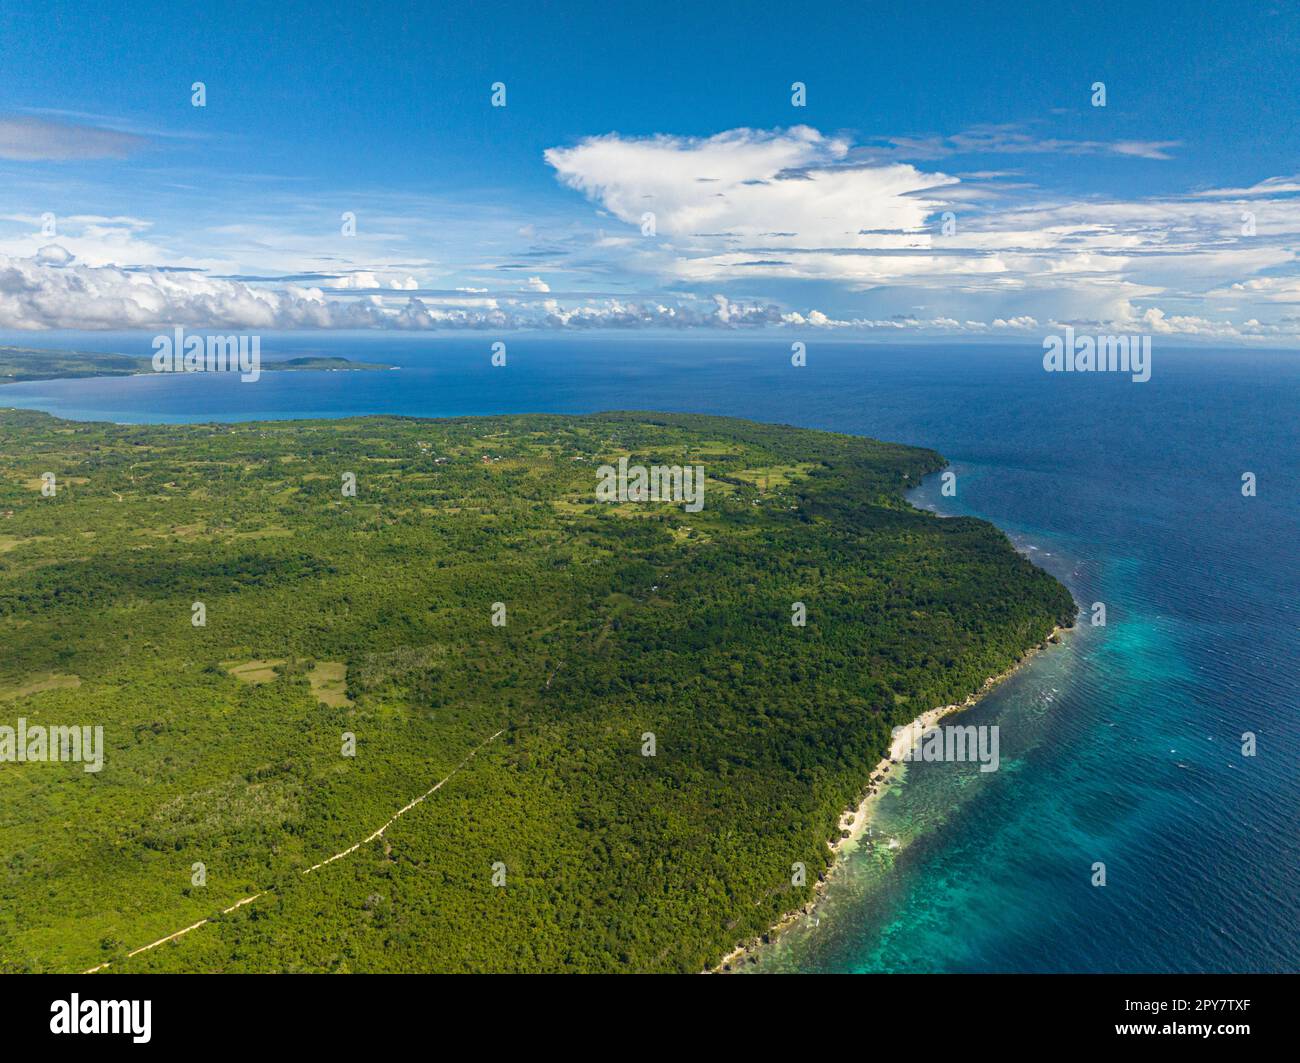 Tropical beach with crystal clear water in the tropics. Siquijor, Philippines. Stock Photo